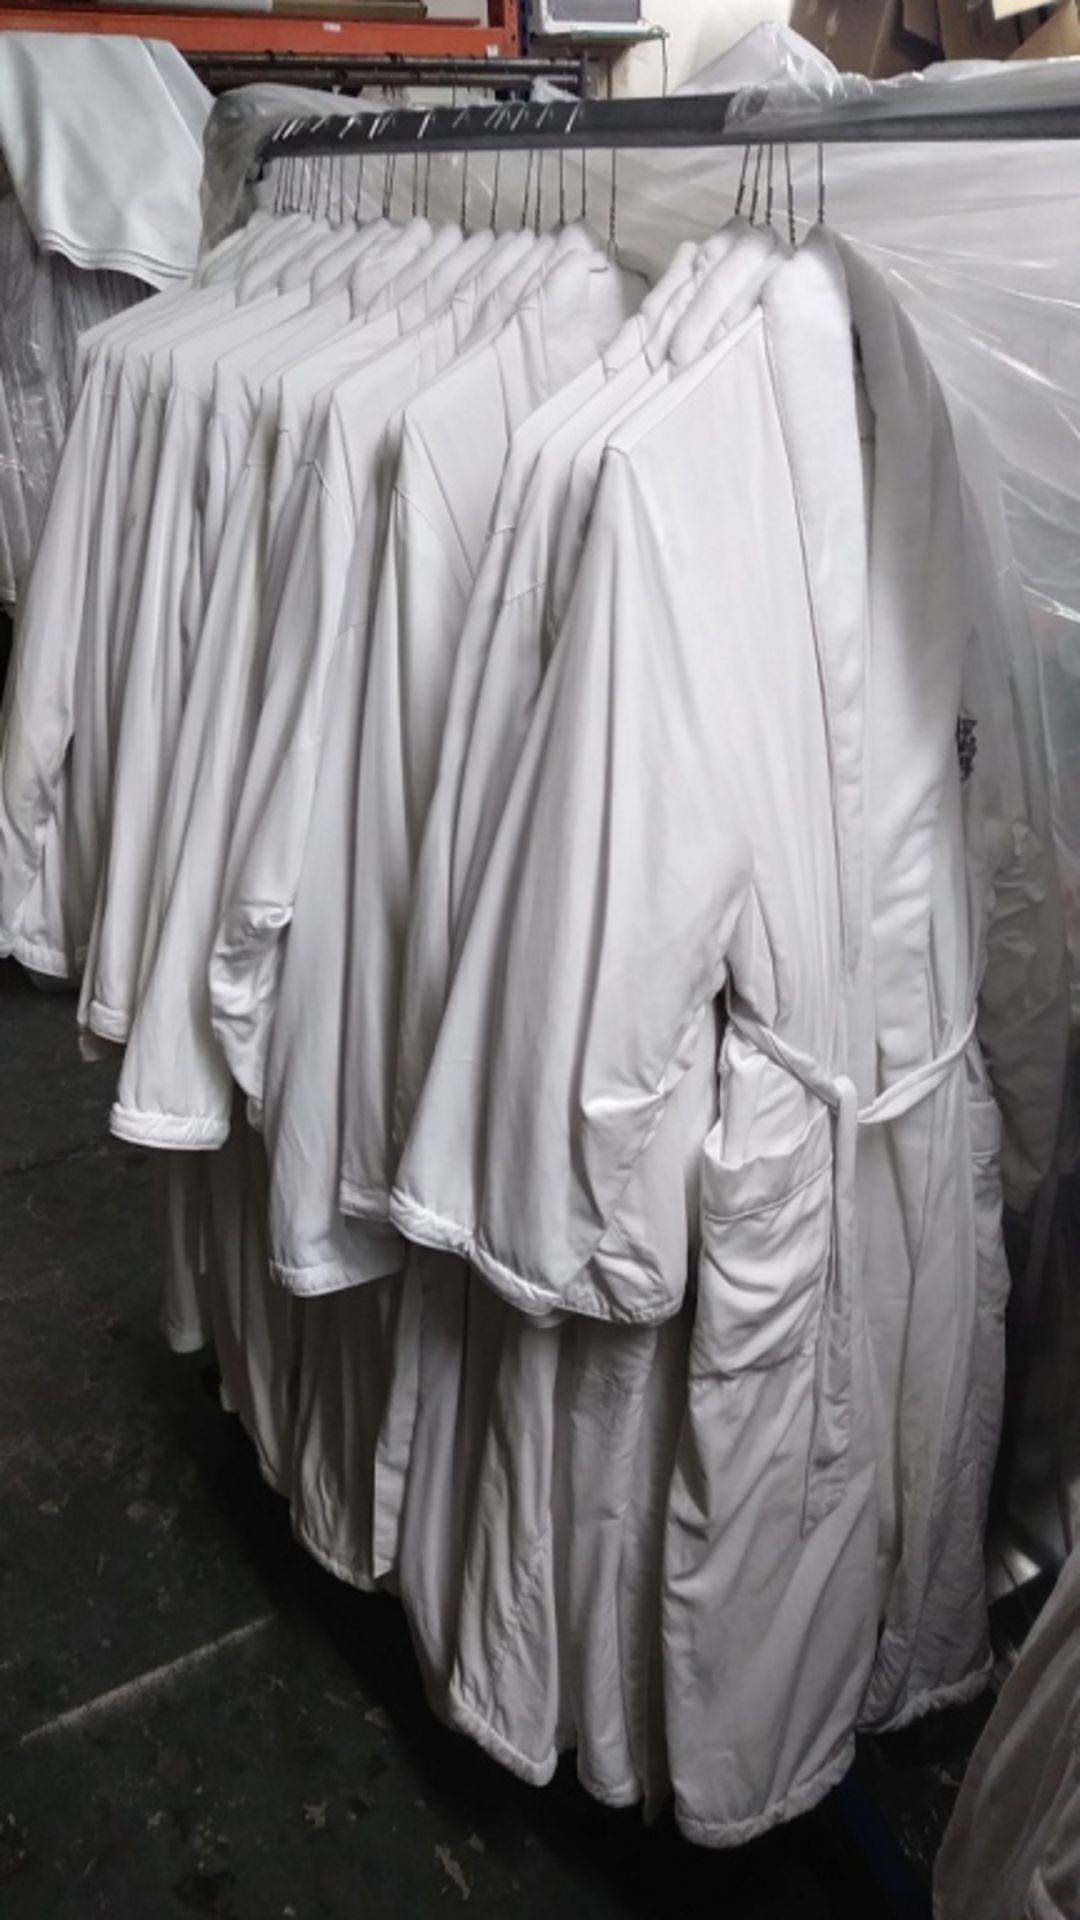 Used White Bath Robes - Assorted Sizes (INCLUDES 25 ROBES) - Image 3 of 3